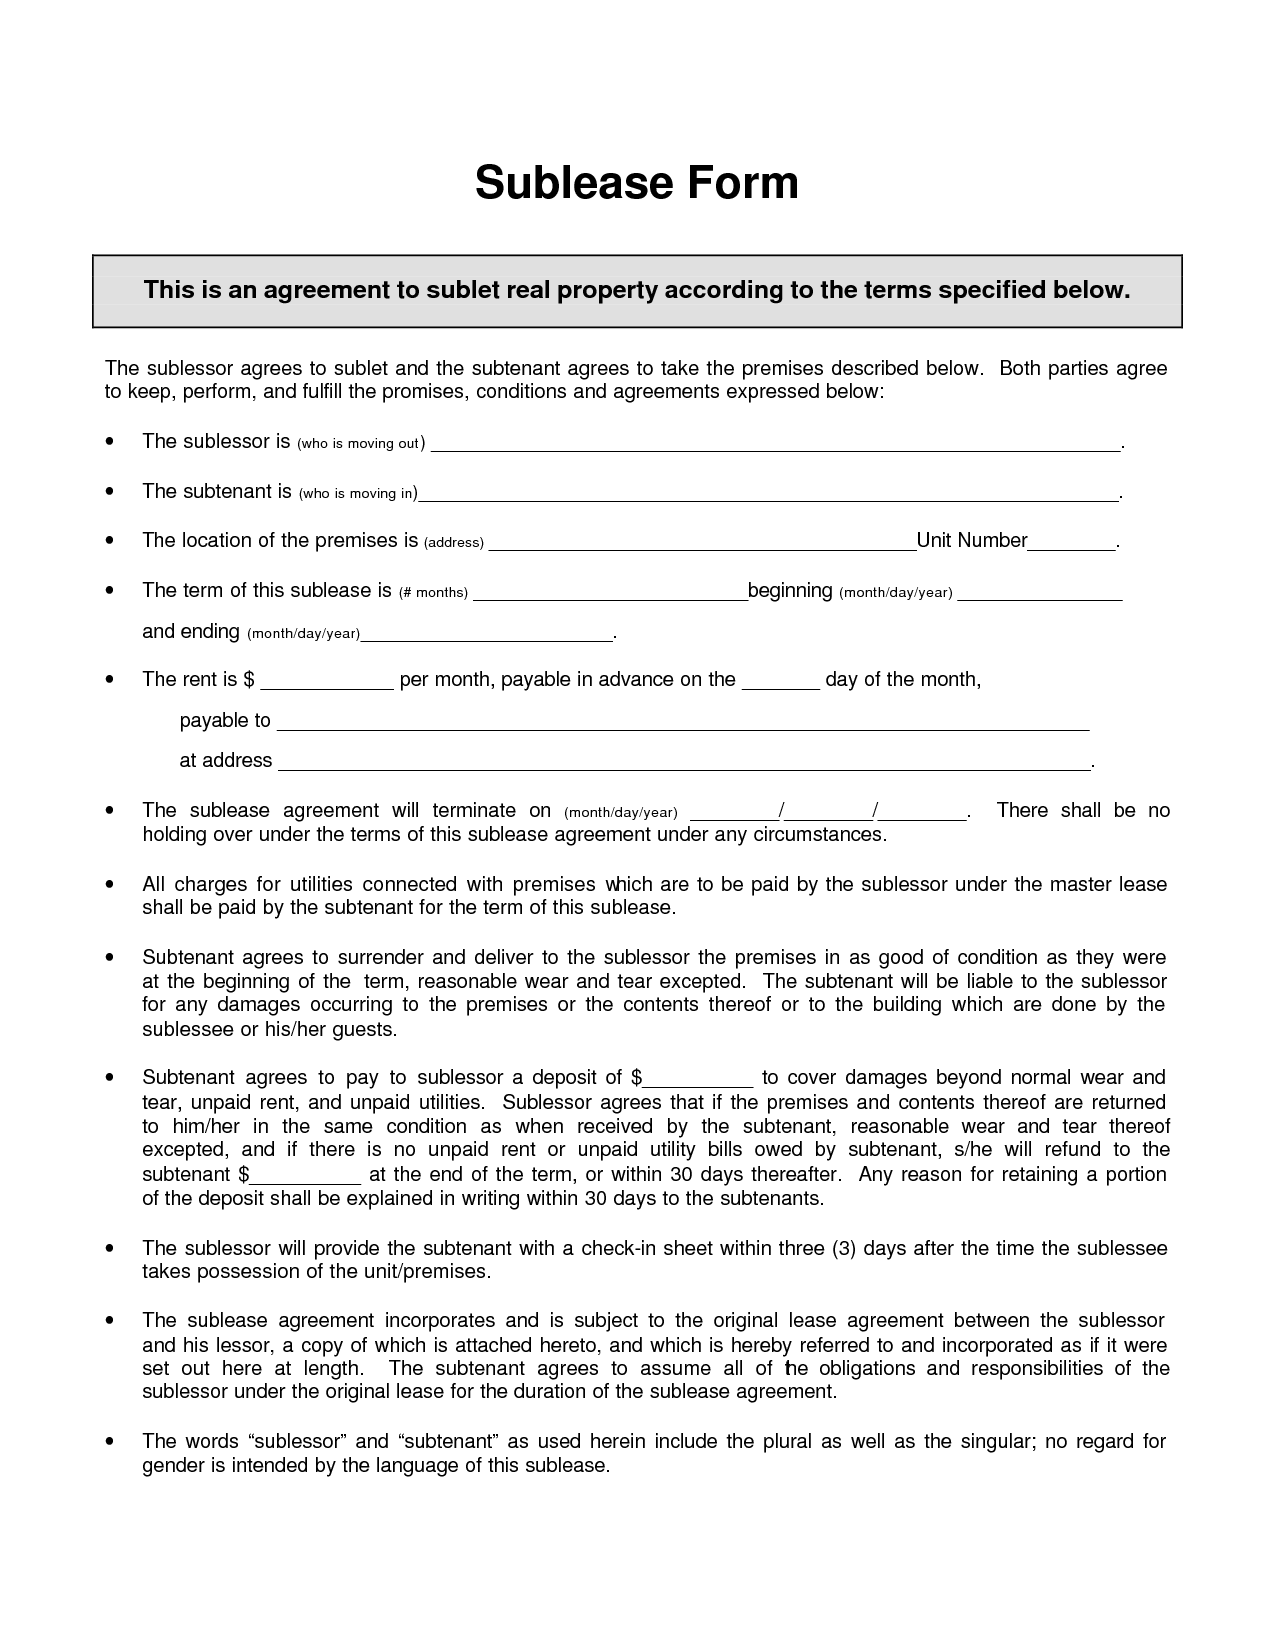 sublease-agreement-sample-free-printable-documents